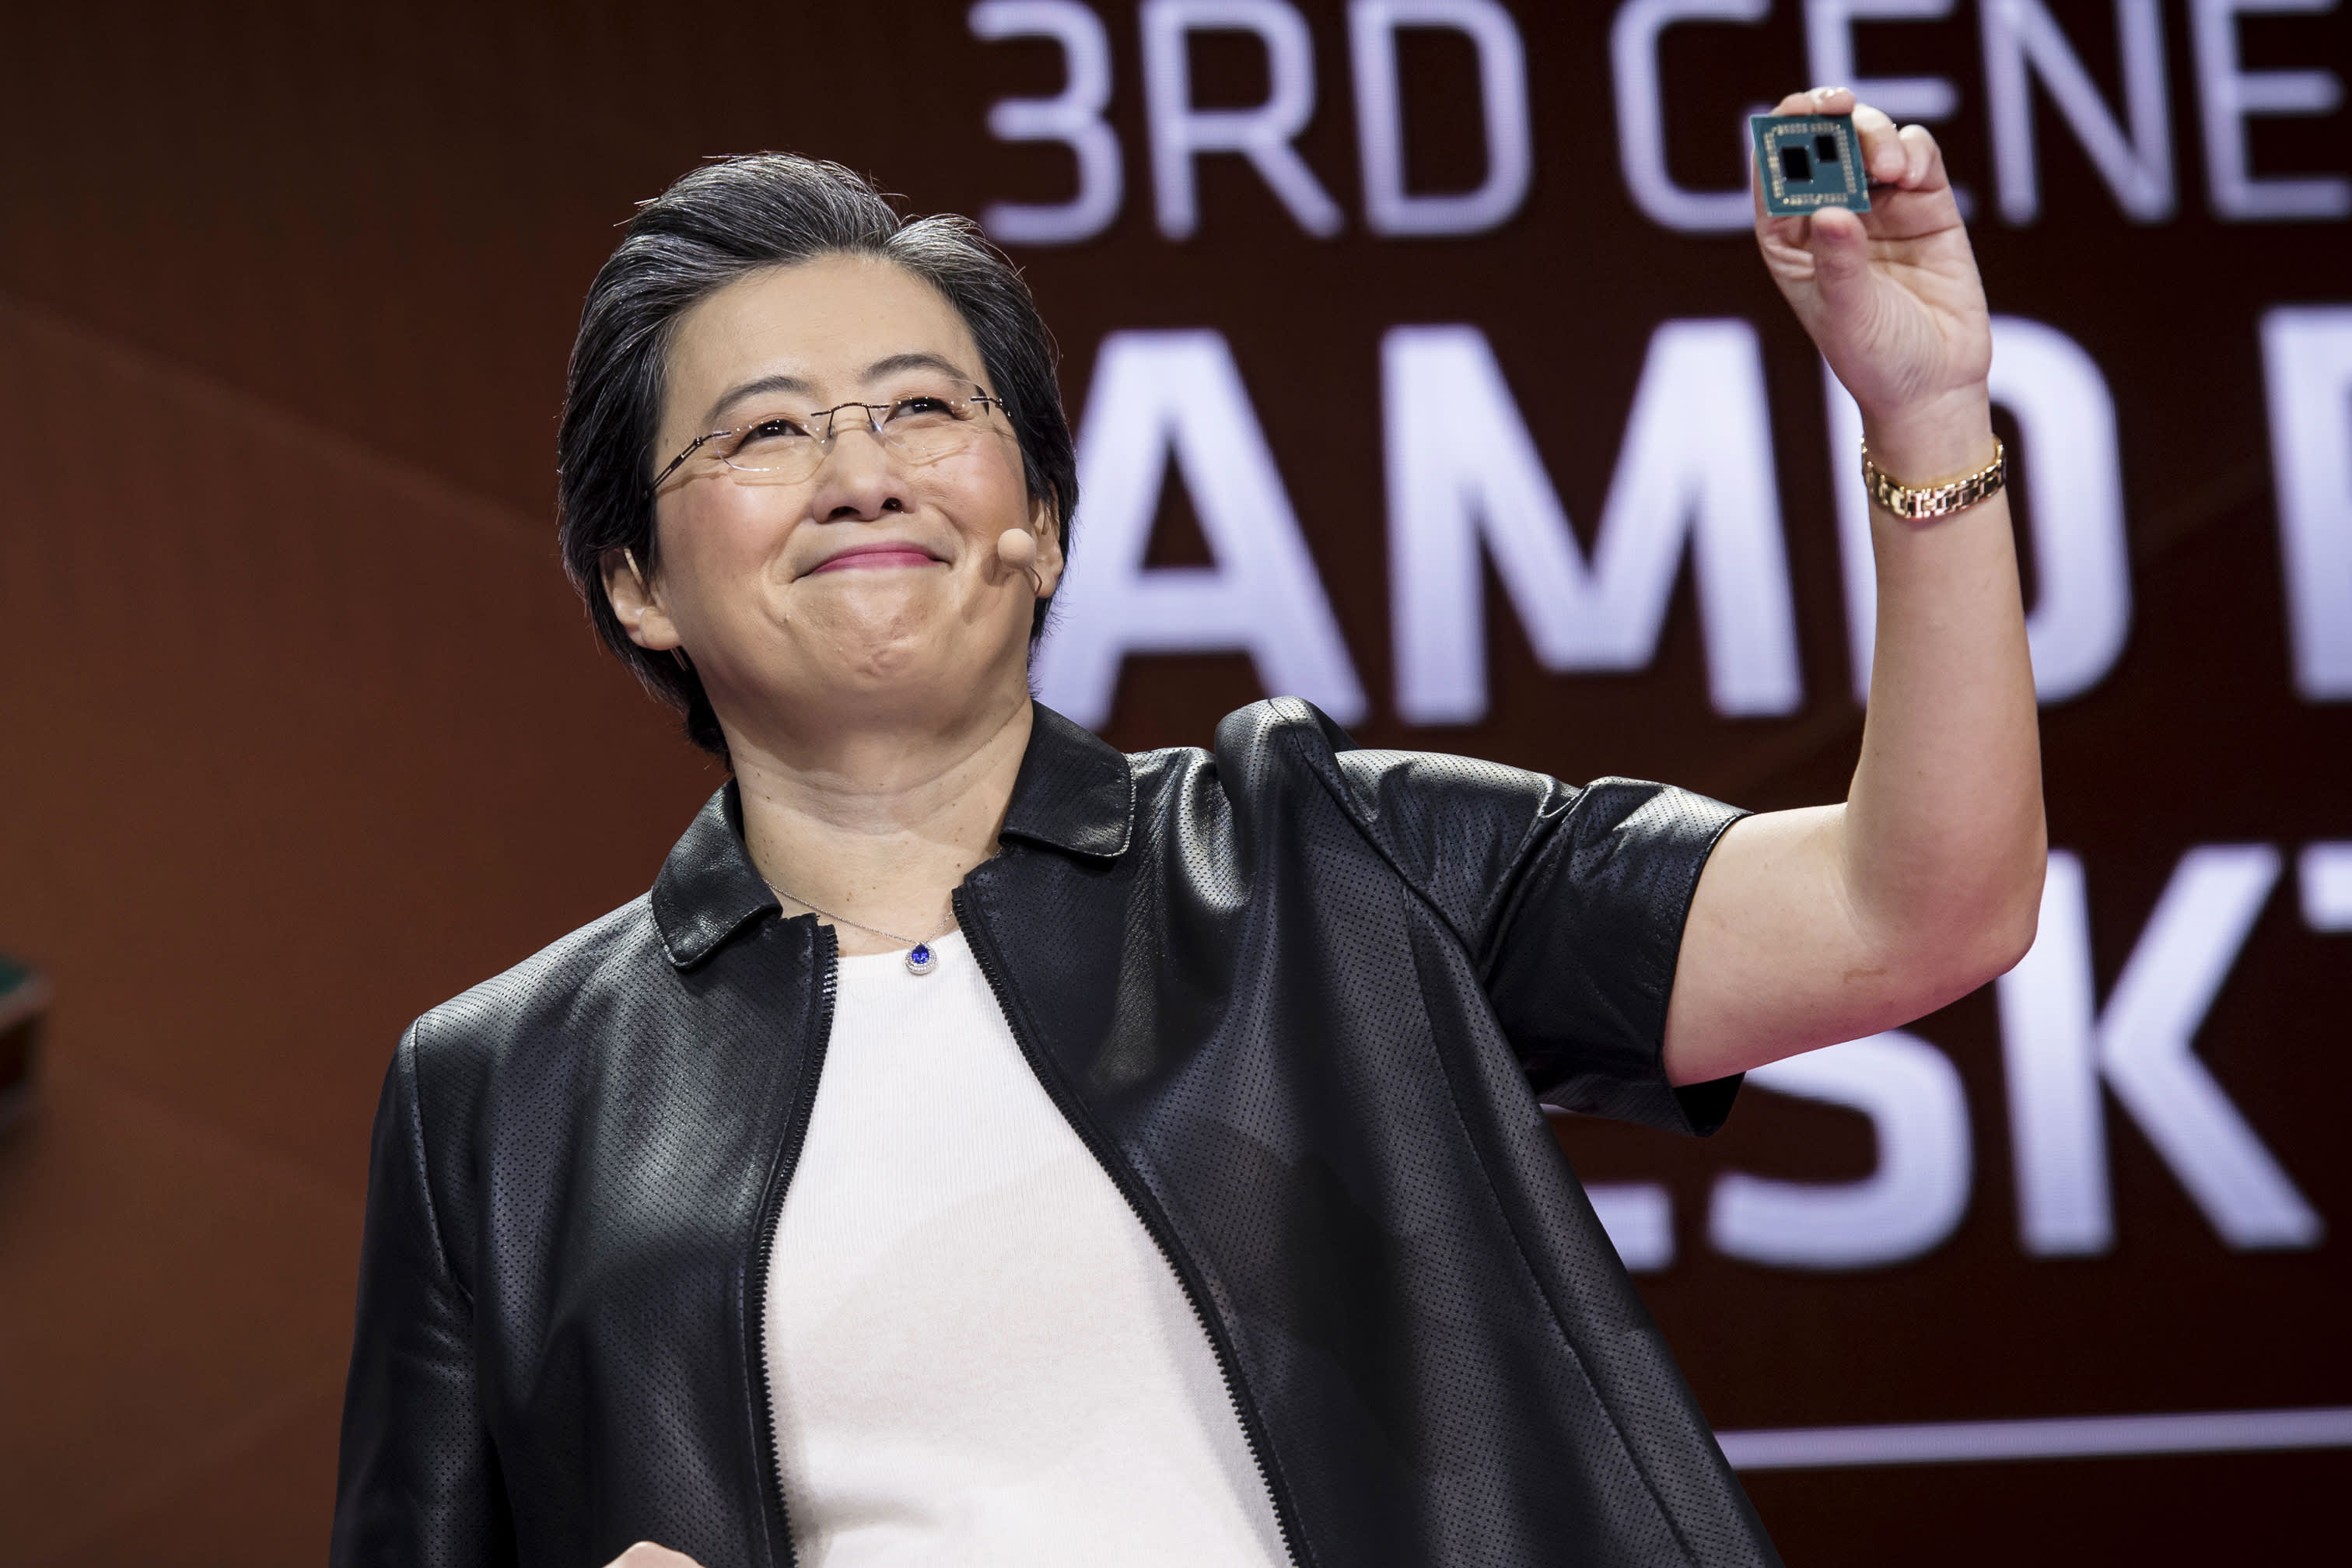 AMD (AMD) earnings in the fourth quarter of 2020